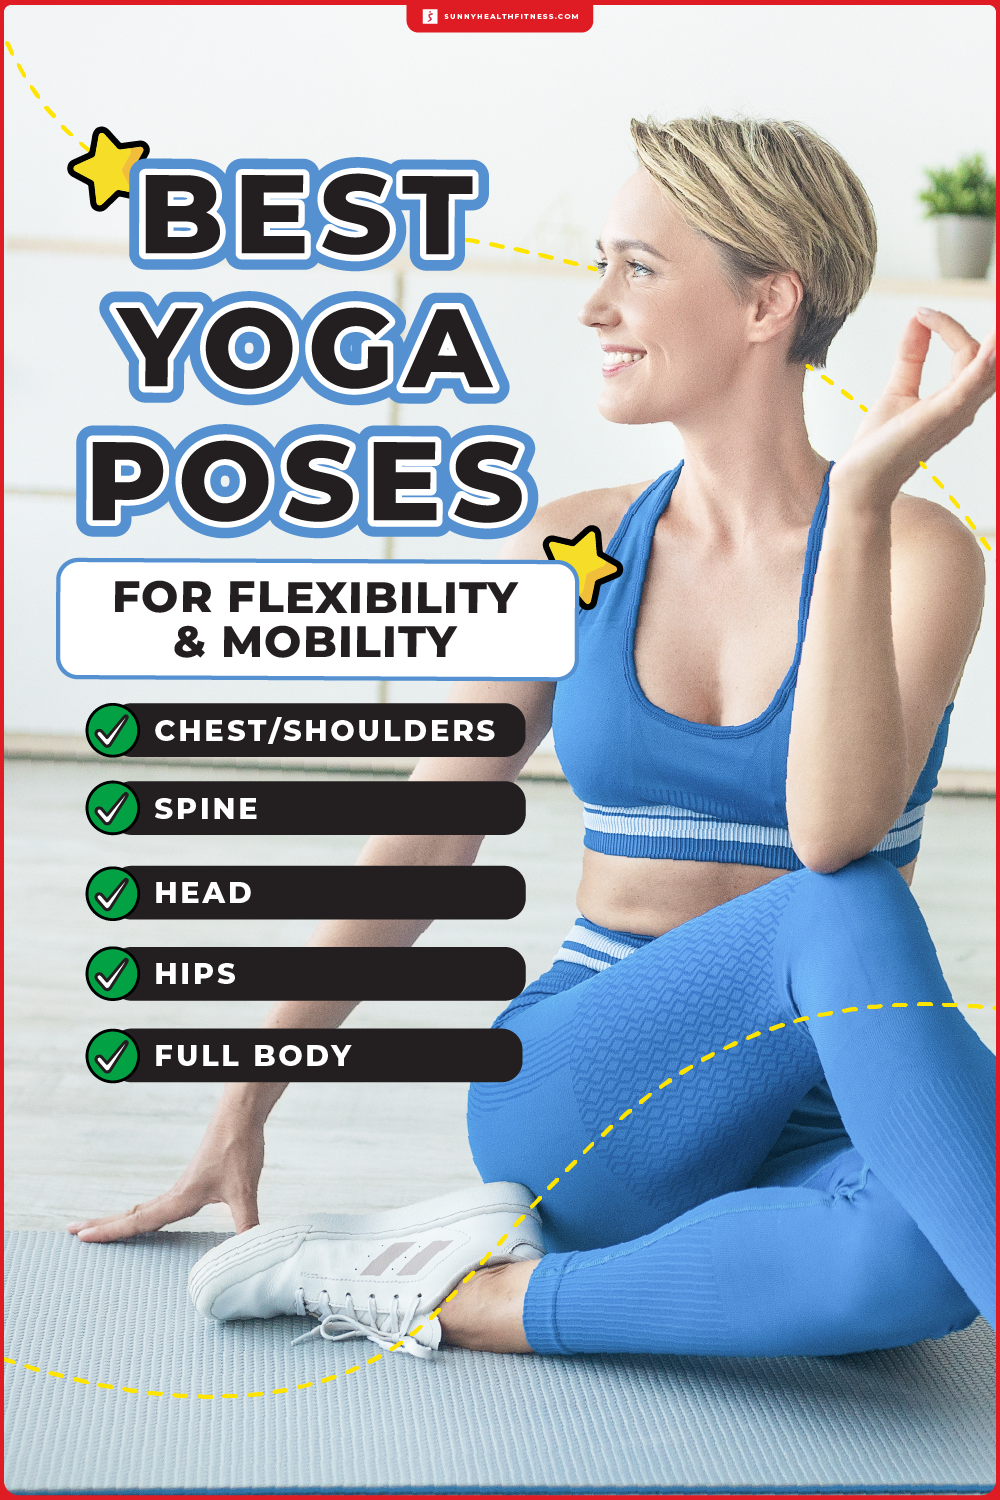 Best Yoga Poses for Flexibility & Mobility Infographic